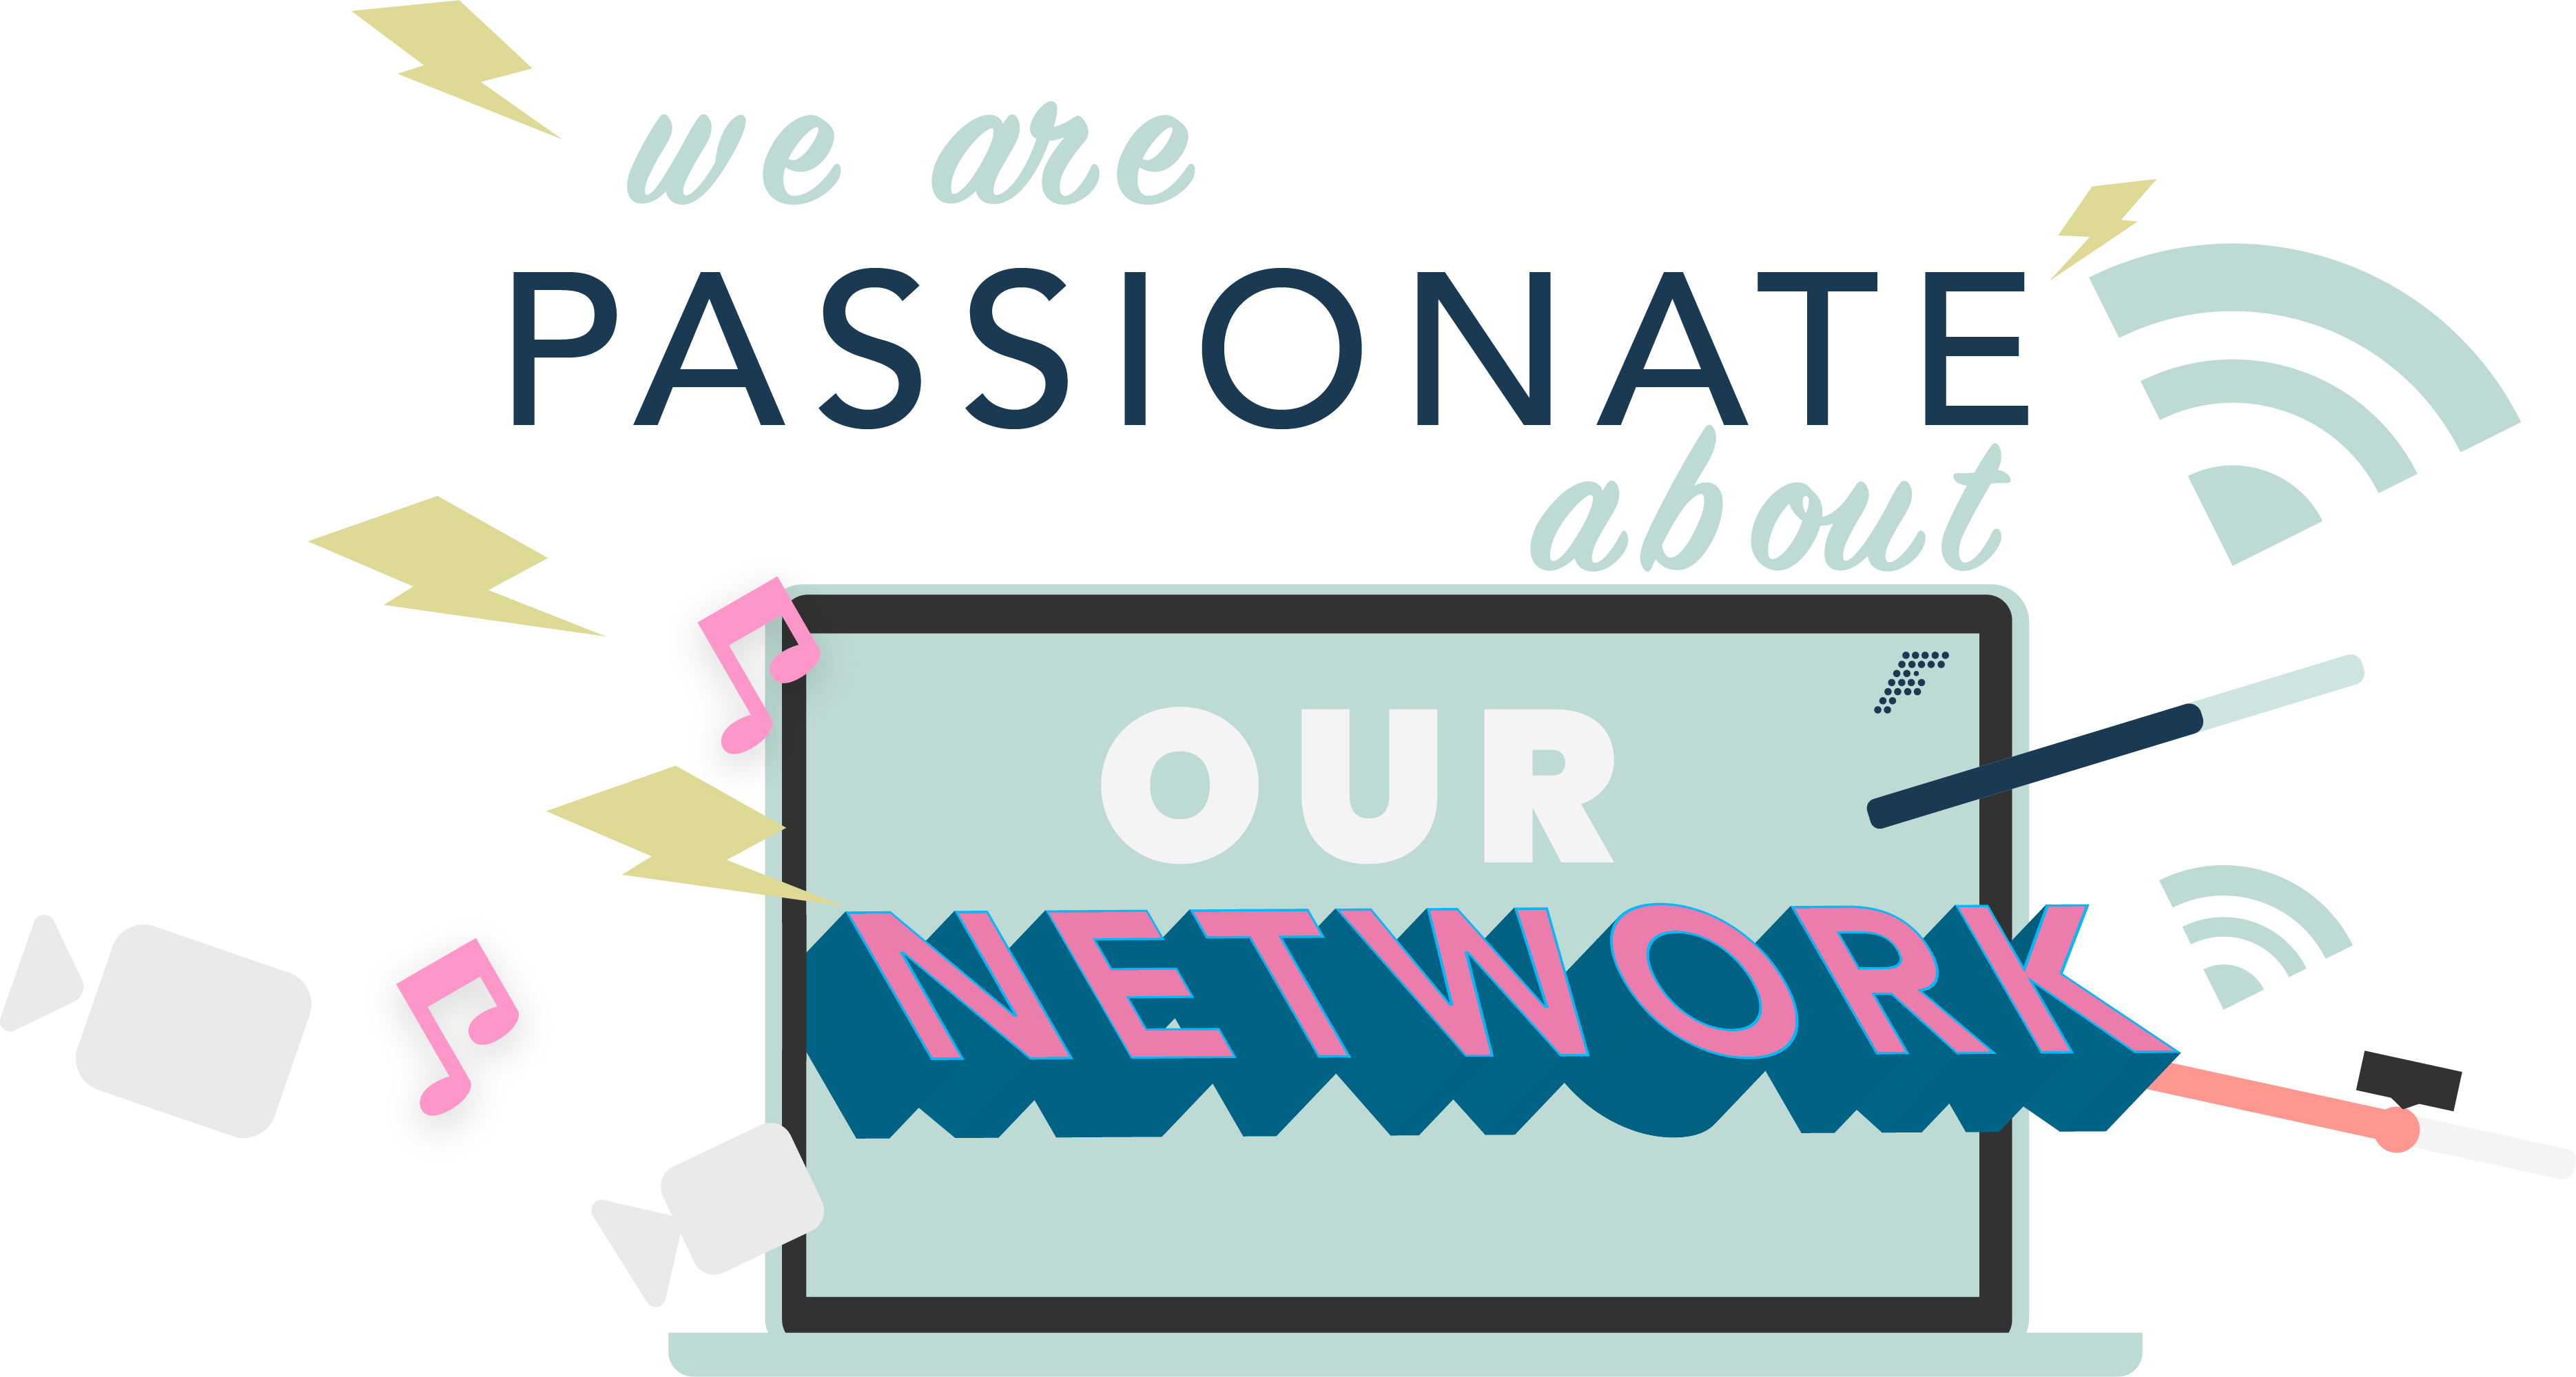 We are passionate about Great Internet! 